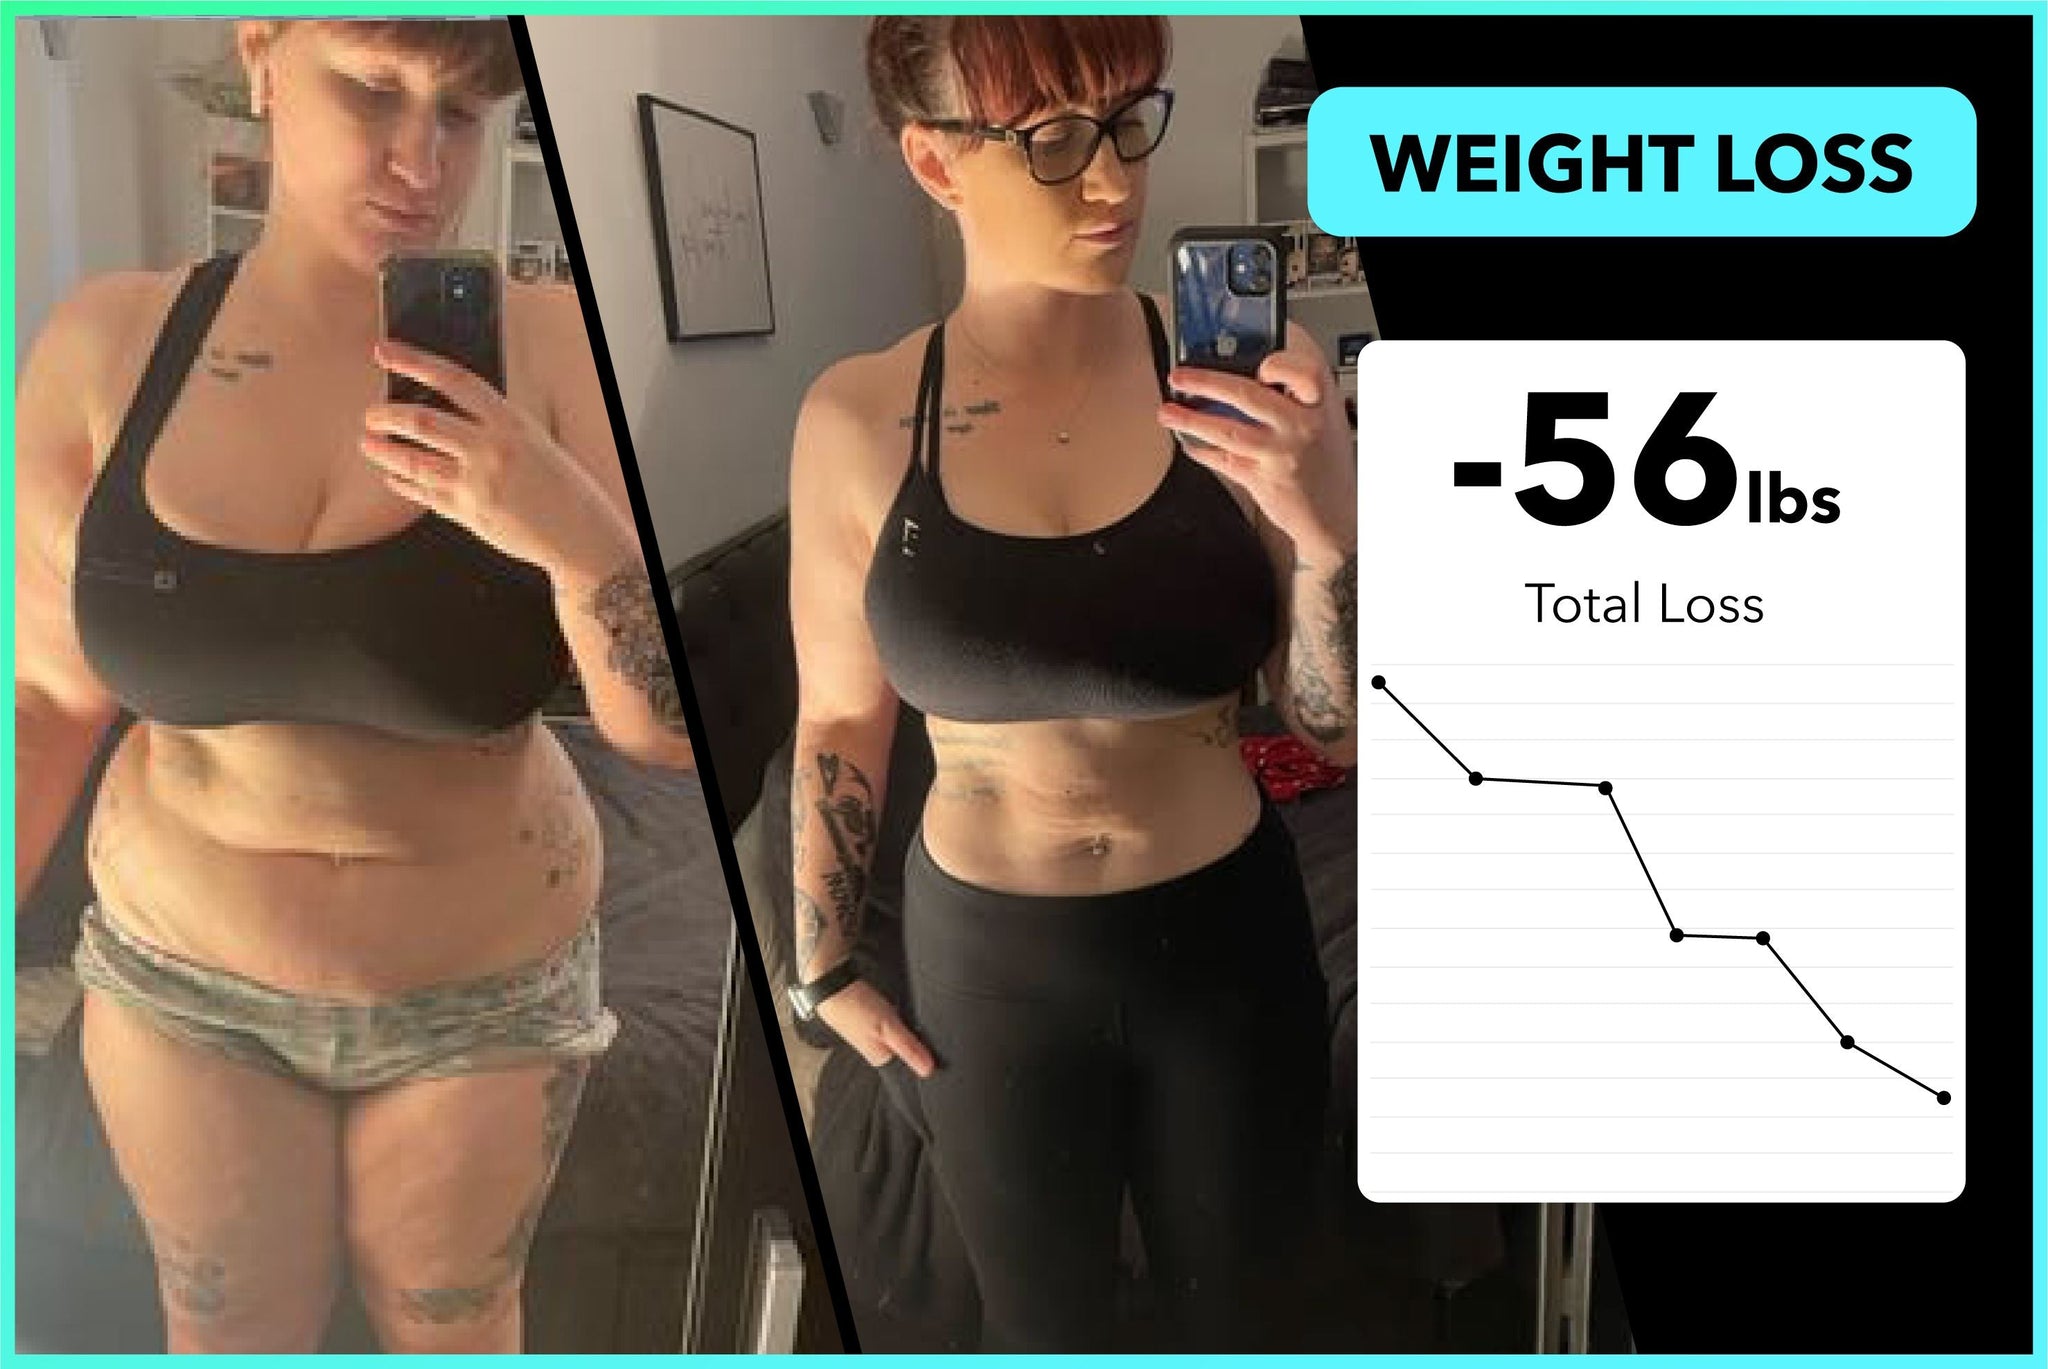 Jaye has lost 56lbs in 5 months with Team RH